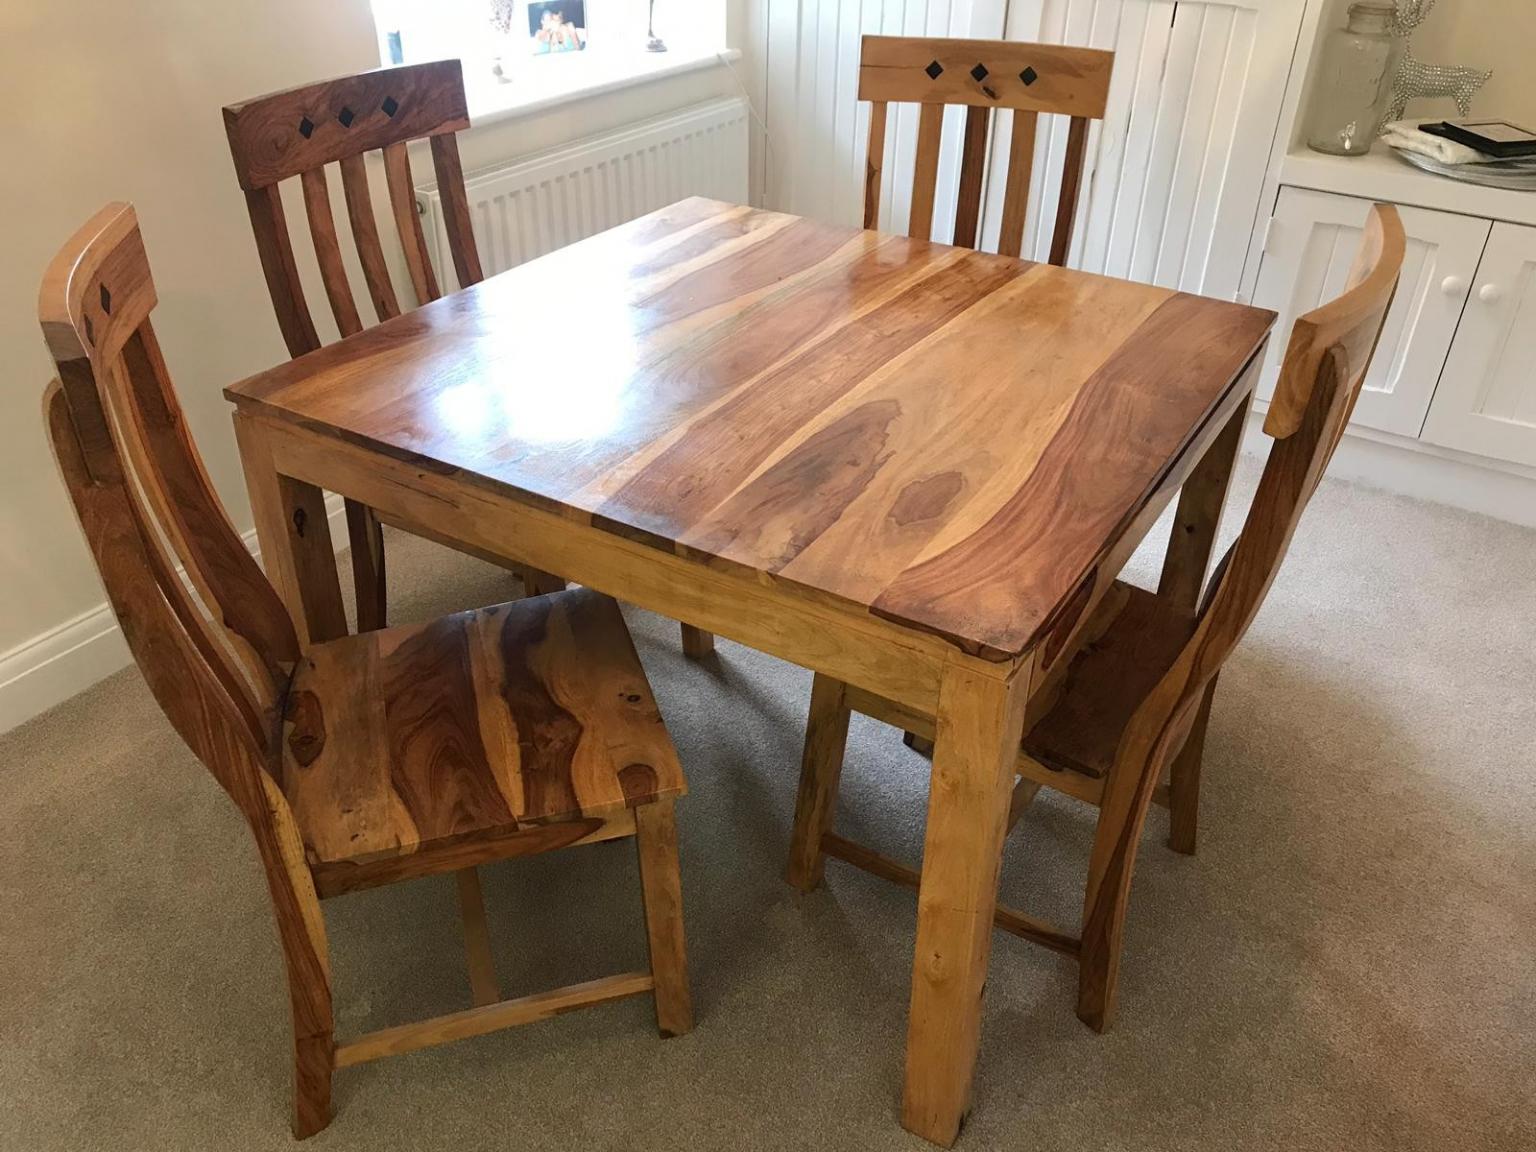 Solid Wood Square Dining Table with 4 Chairs in WA16 Legh for £80.00